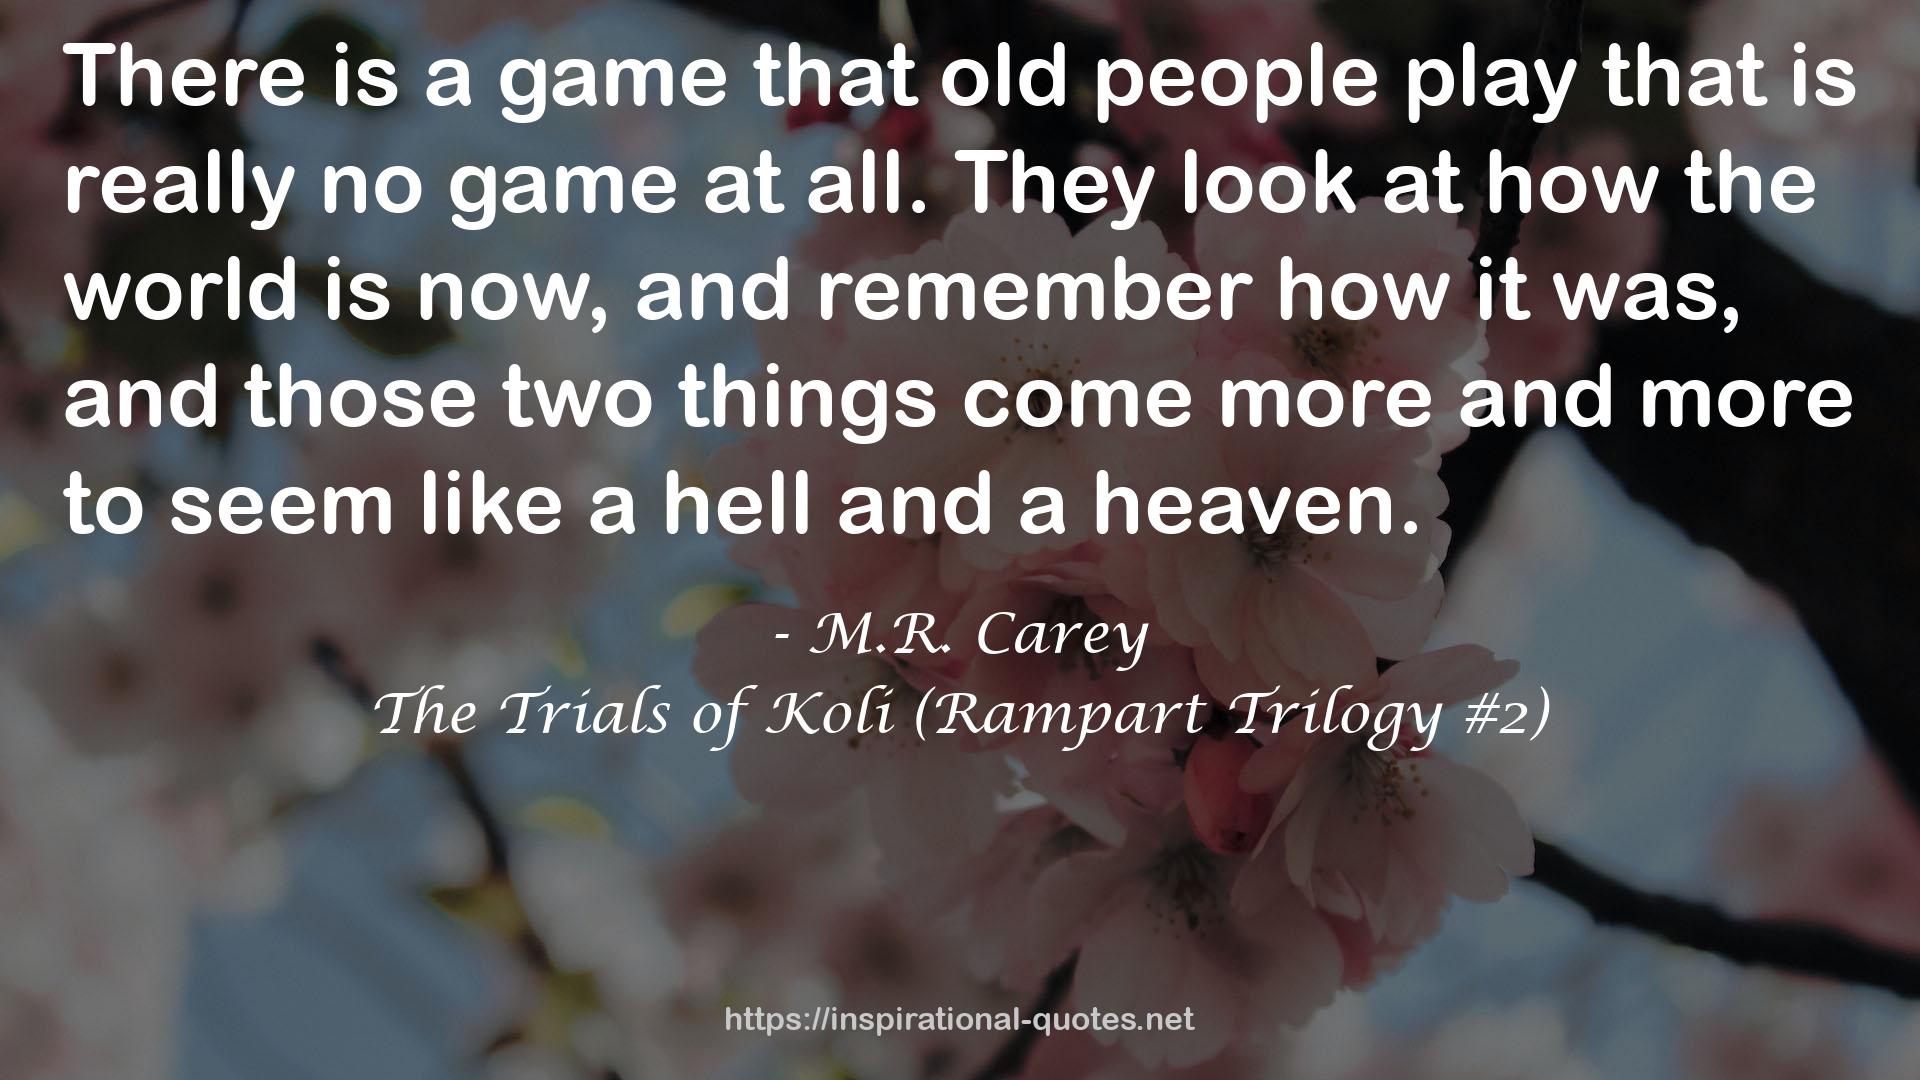 The Trials of Koli (Rampart Trilogy #2) QUOTES